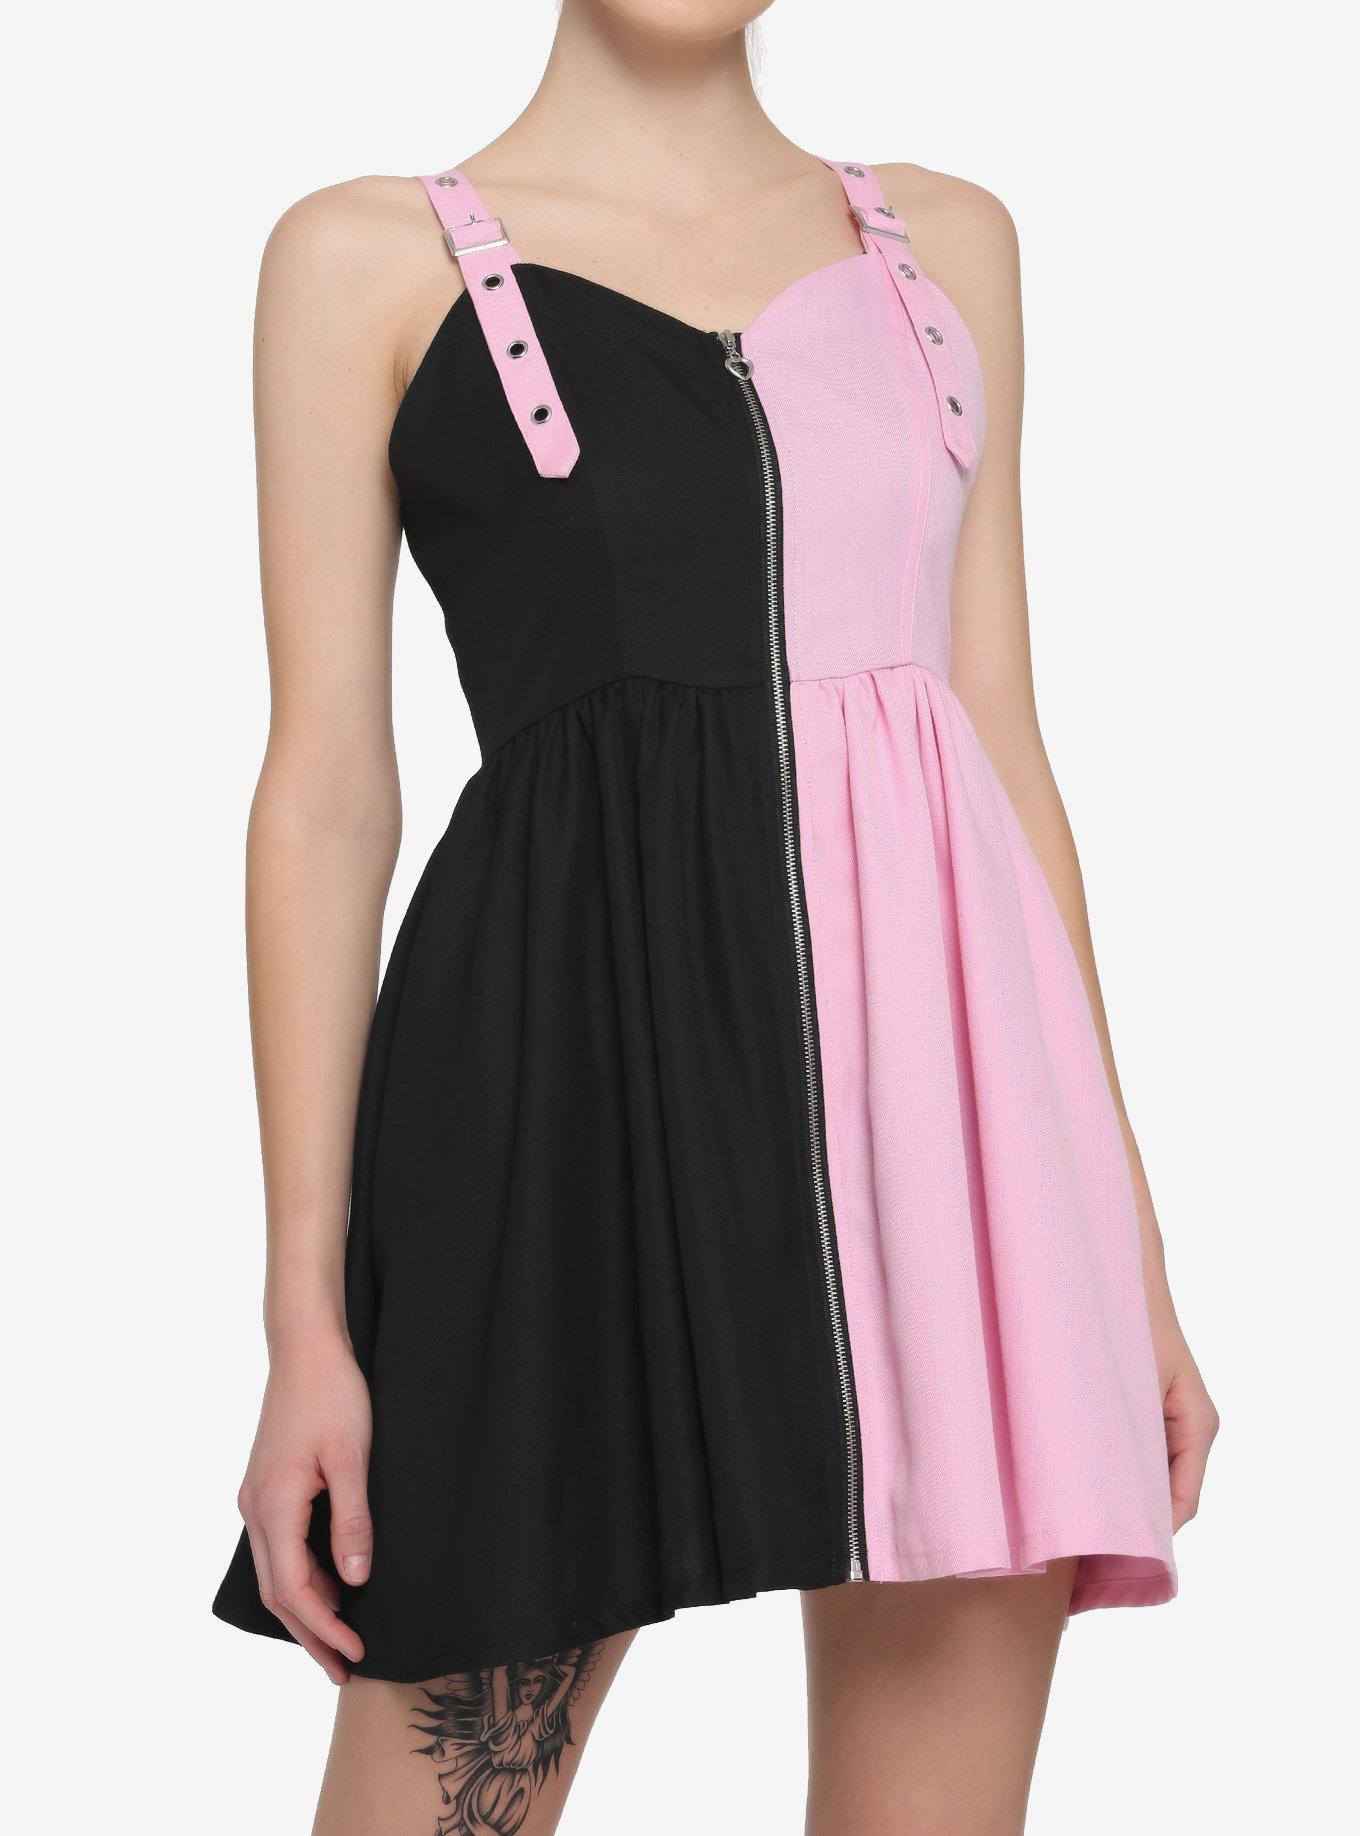 pink and black dress